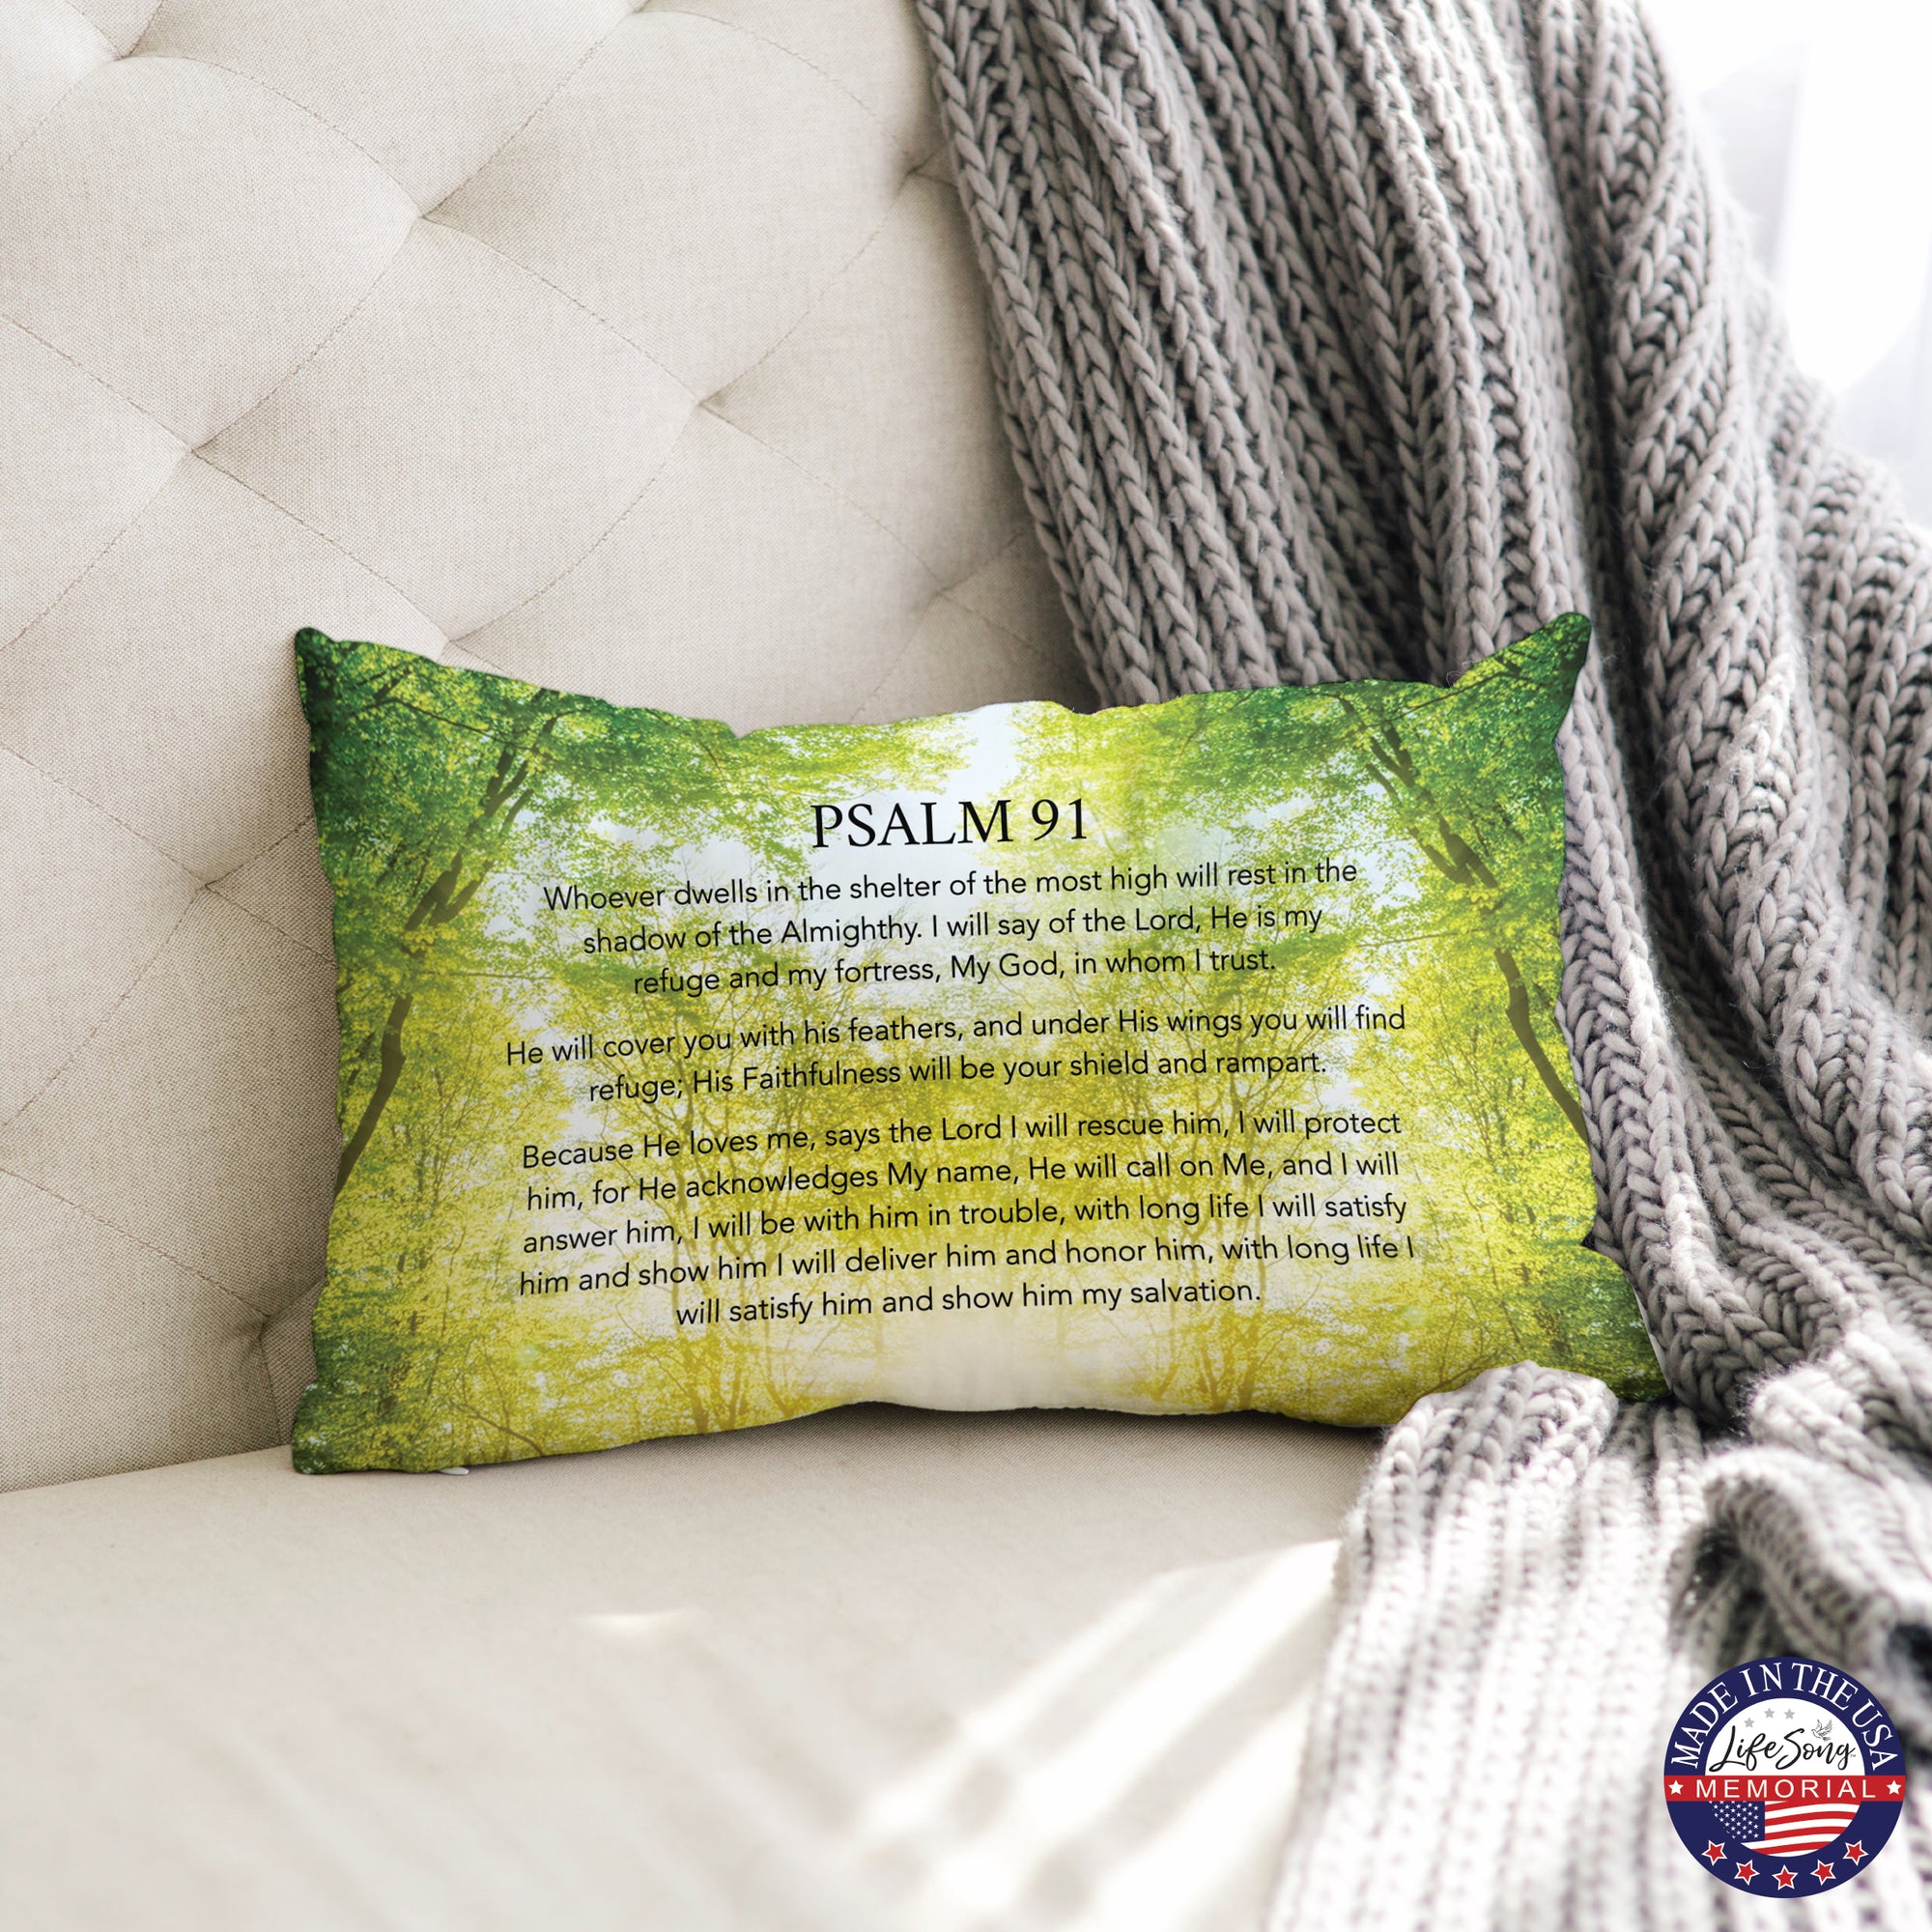 A Memorial Sympathy Throw Pillow, a thoughtful bereavement gift.